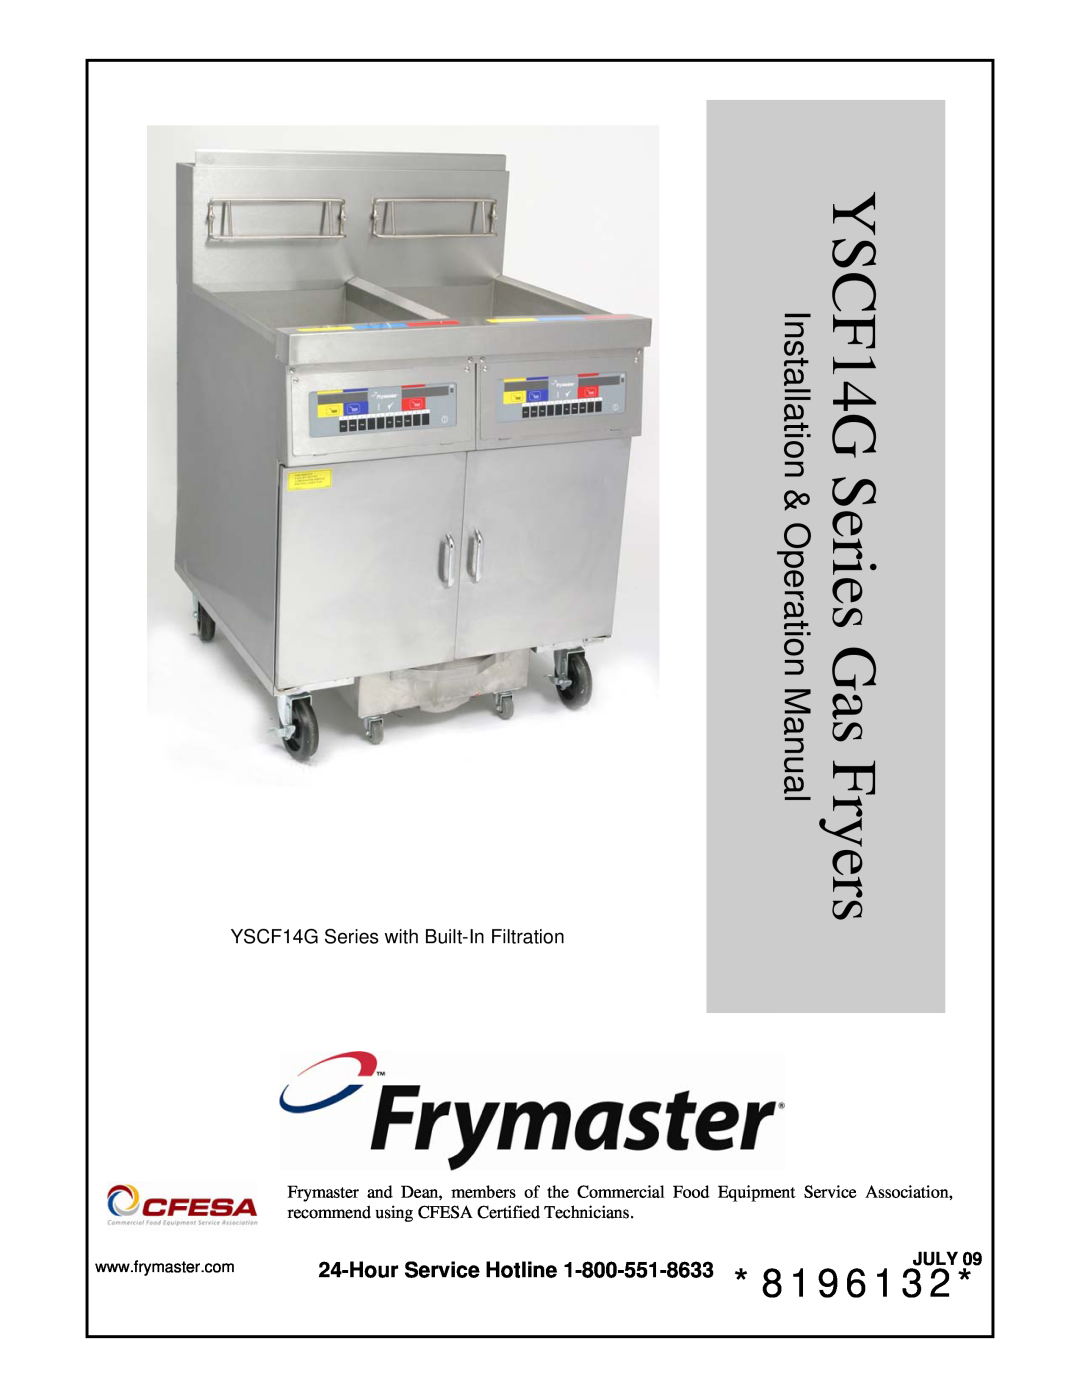 Frymaster operation manual Hour Service Hotline 1-800-551-8633 *8196132, YSCF14G Series with Built-In Filtration, July 